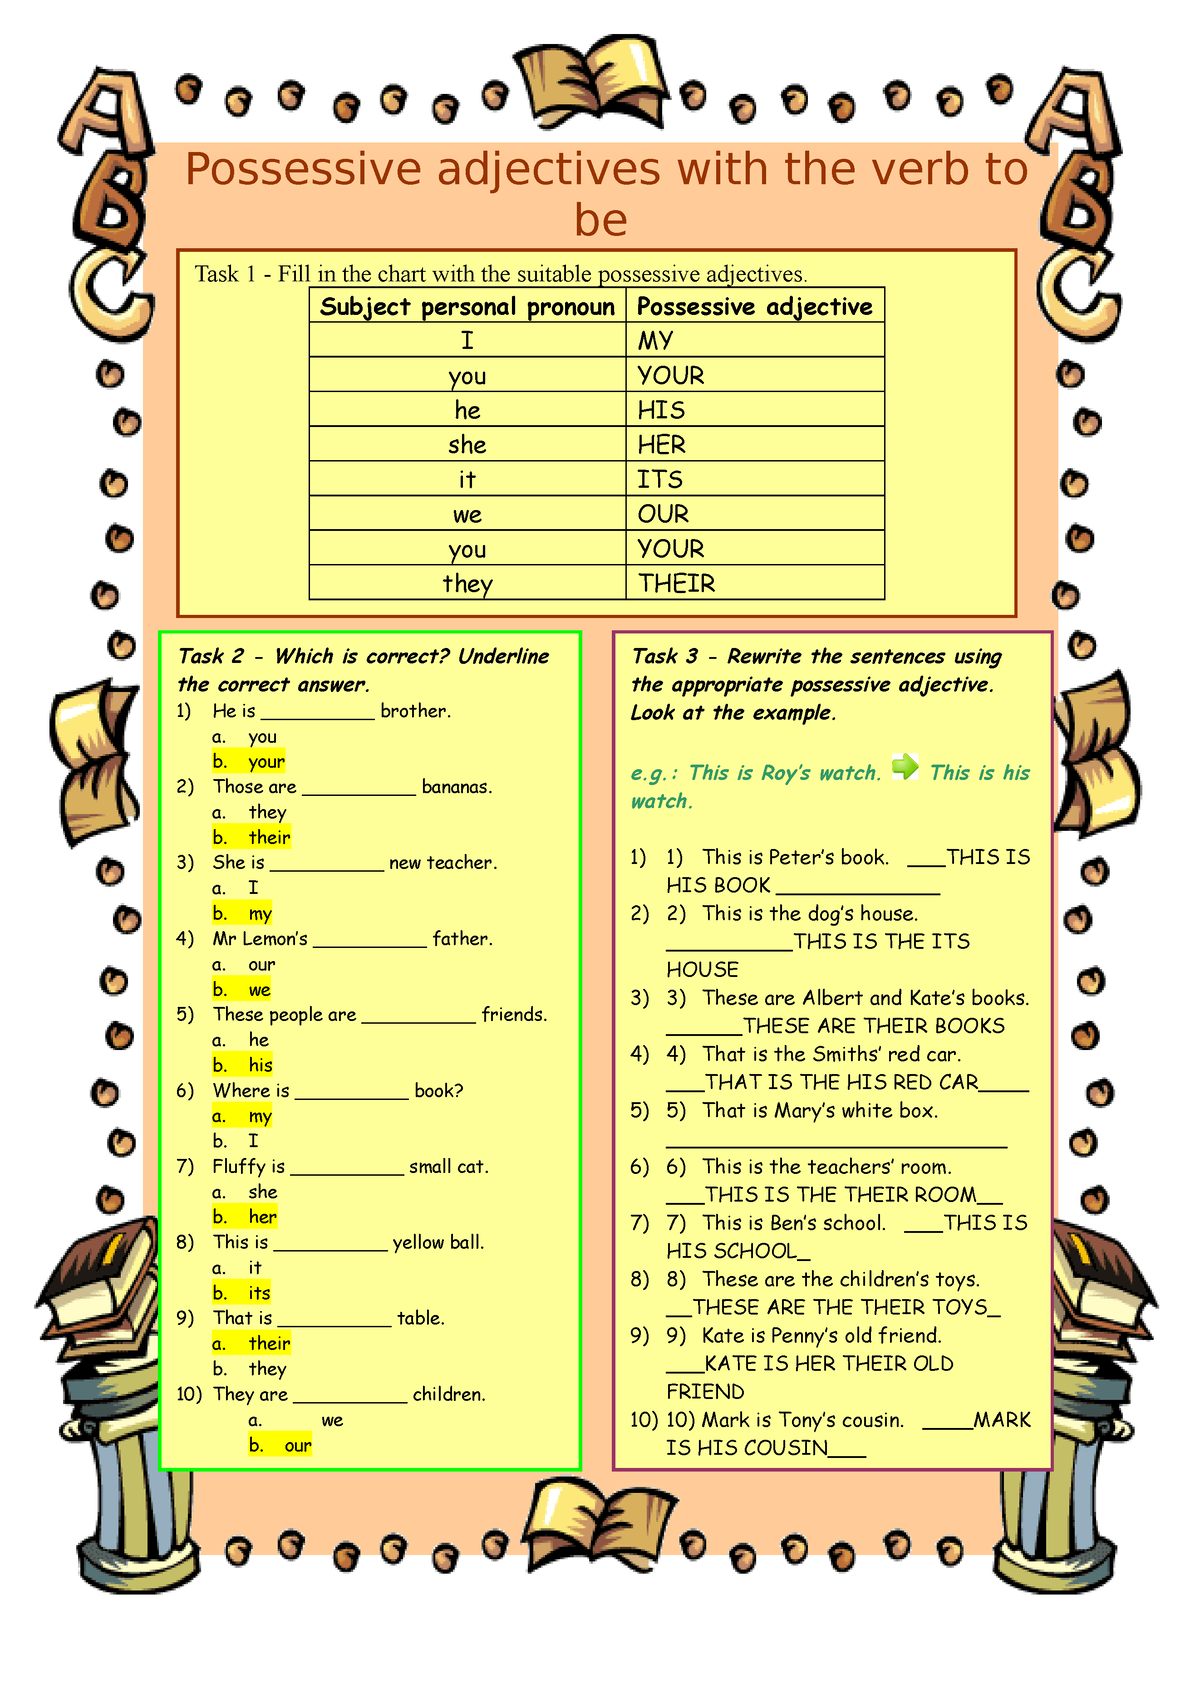 possessive-adjectives-worksheet-2-possessive-adjectives-with-the-verb